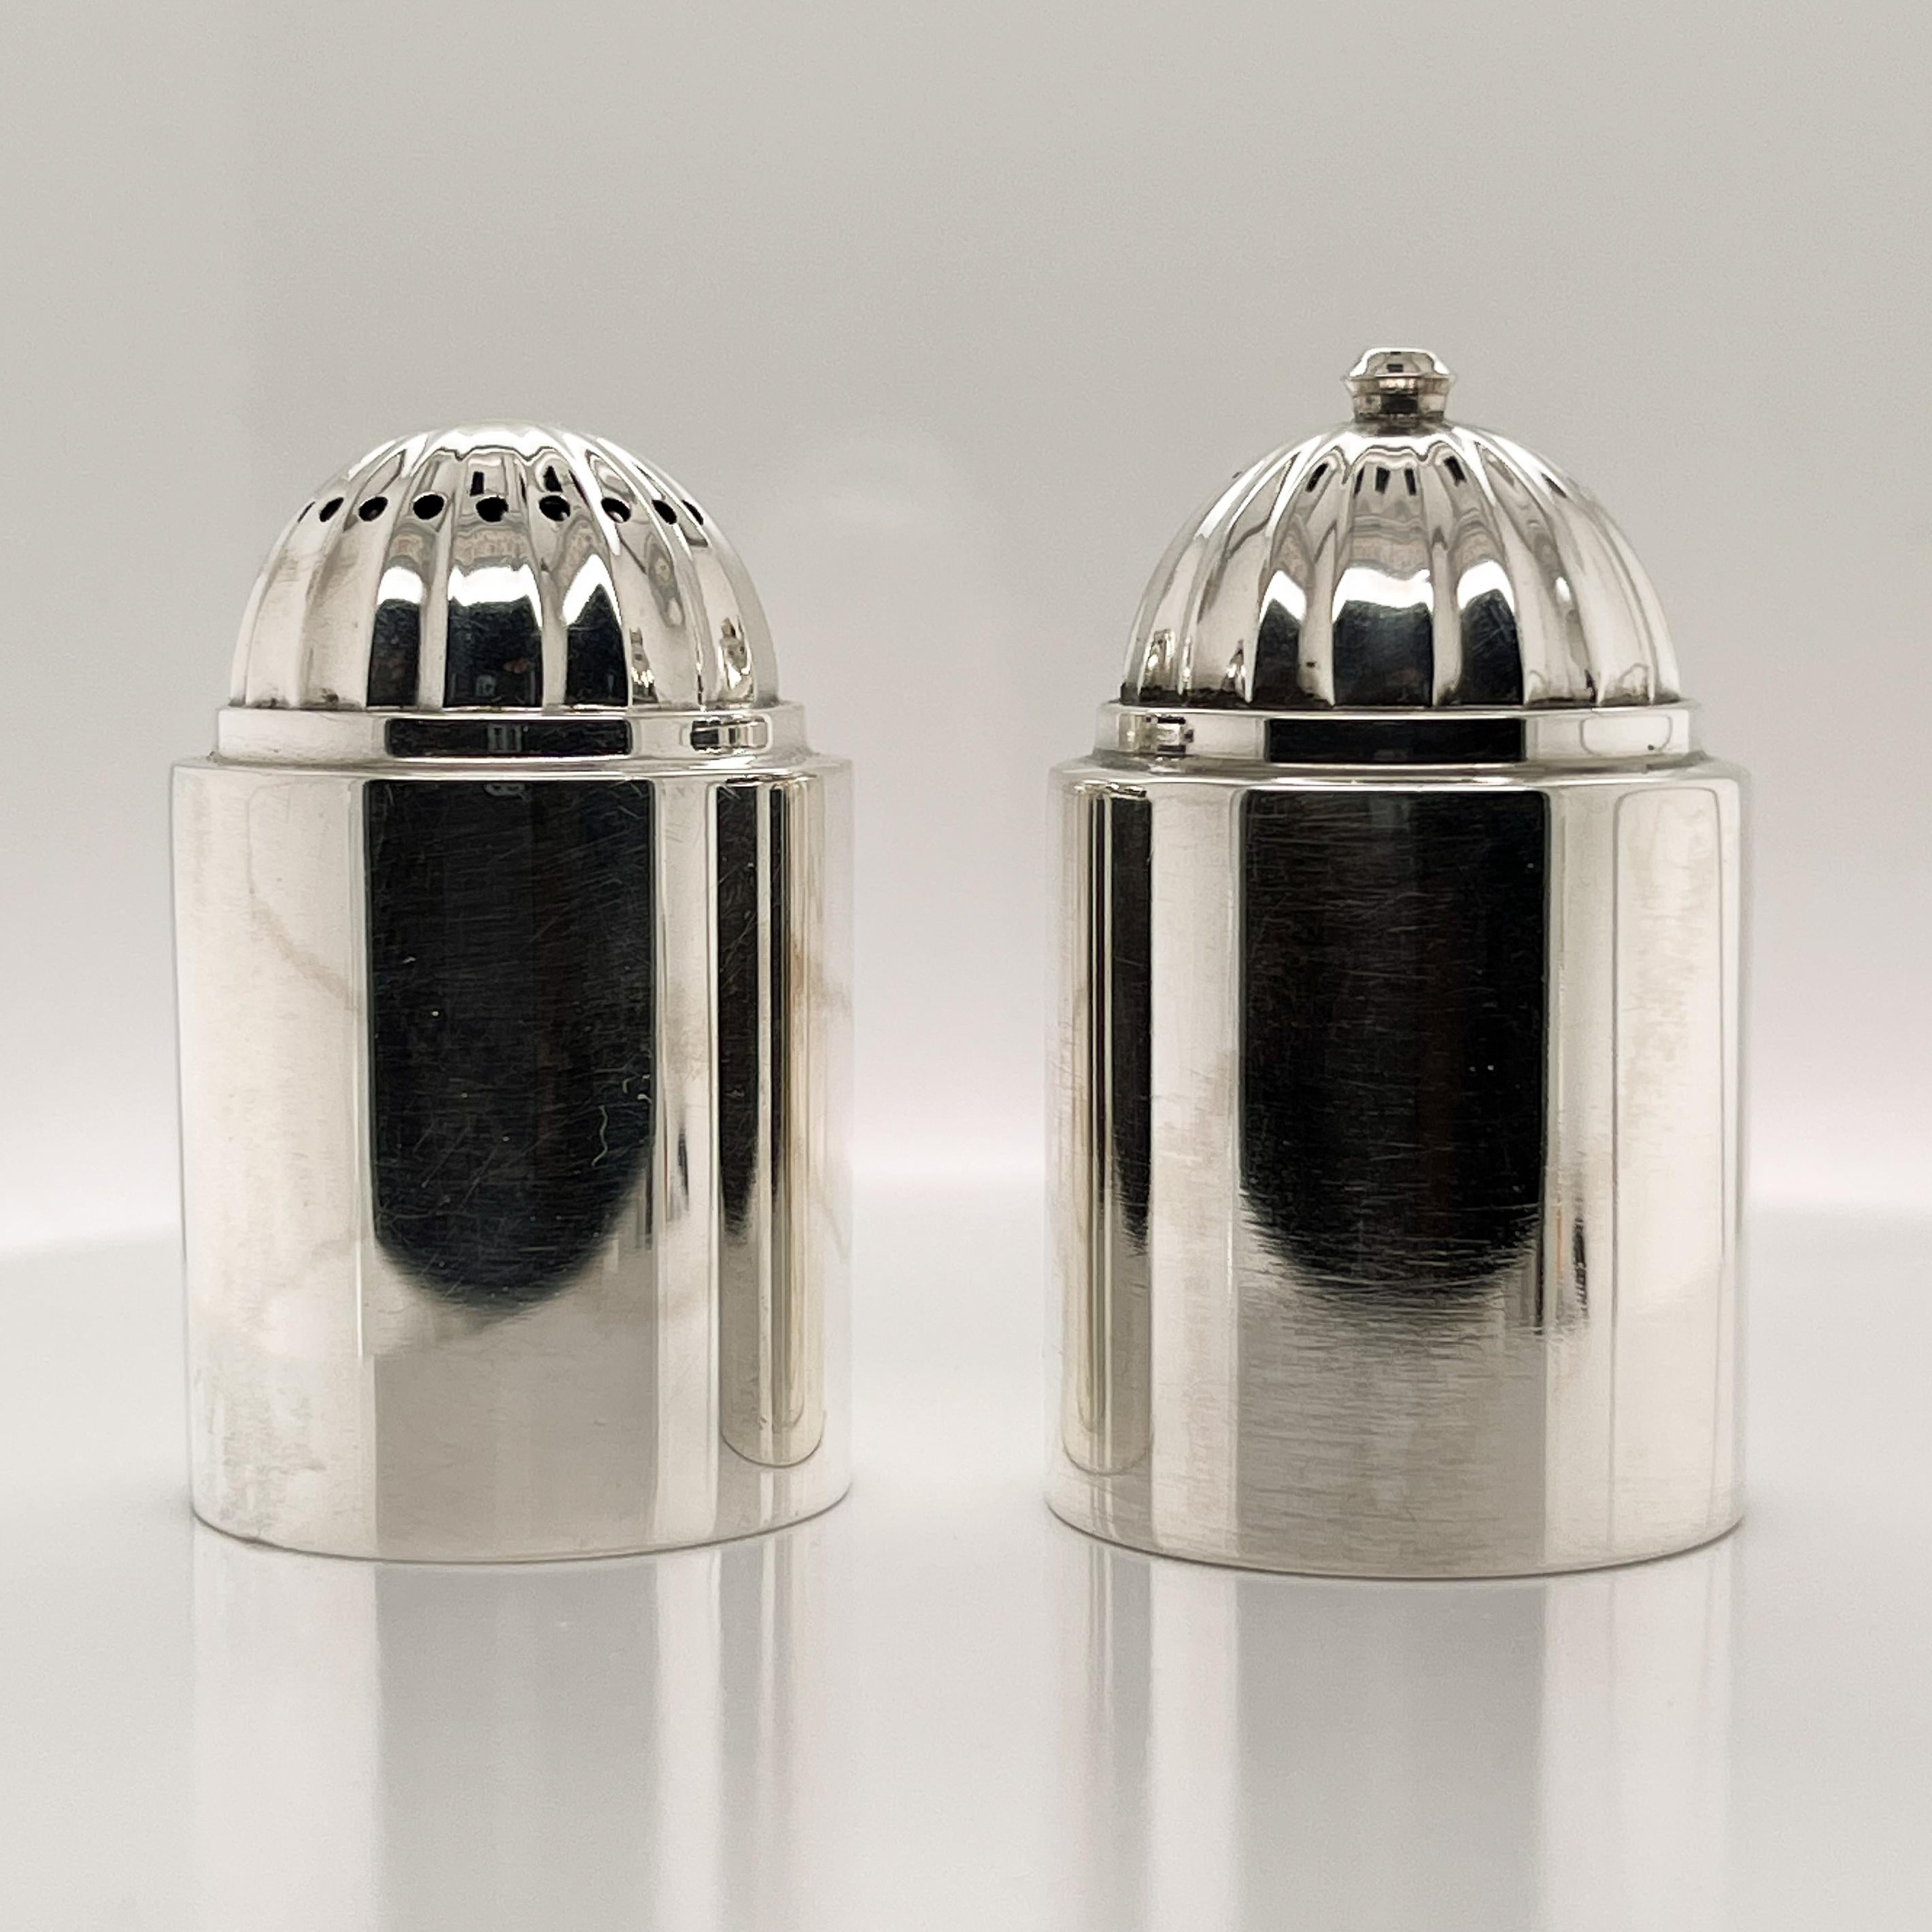 Pair of Danish Modern Georg Jensen Sterling Silver Salt and Pepper Shakers # 627 In Good Condition For Sale In Philadelphia, PA